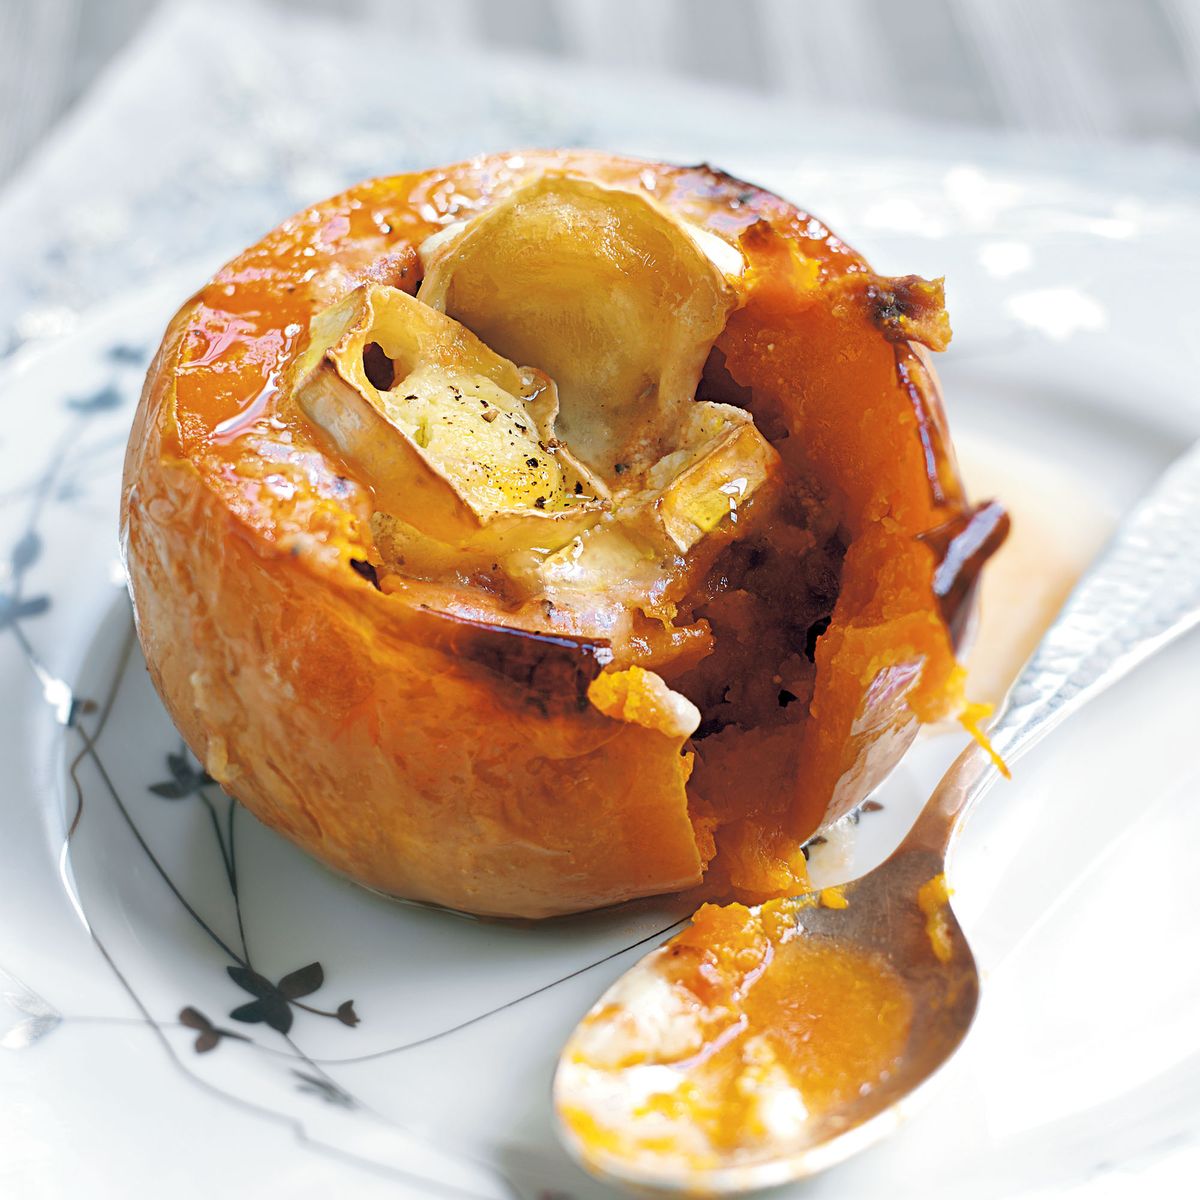 Give this roasted butternut squash with goats cheese a try if you love vegetarian starters